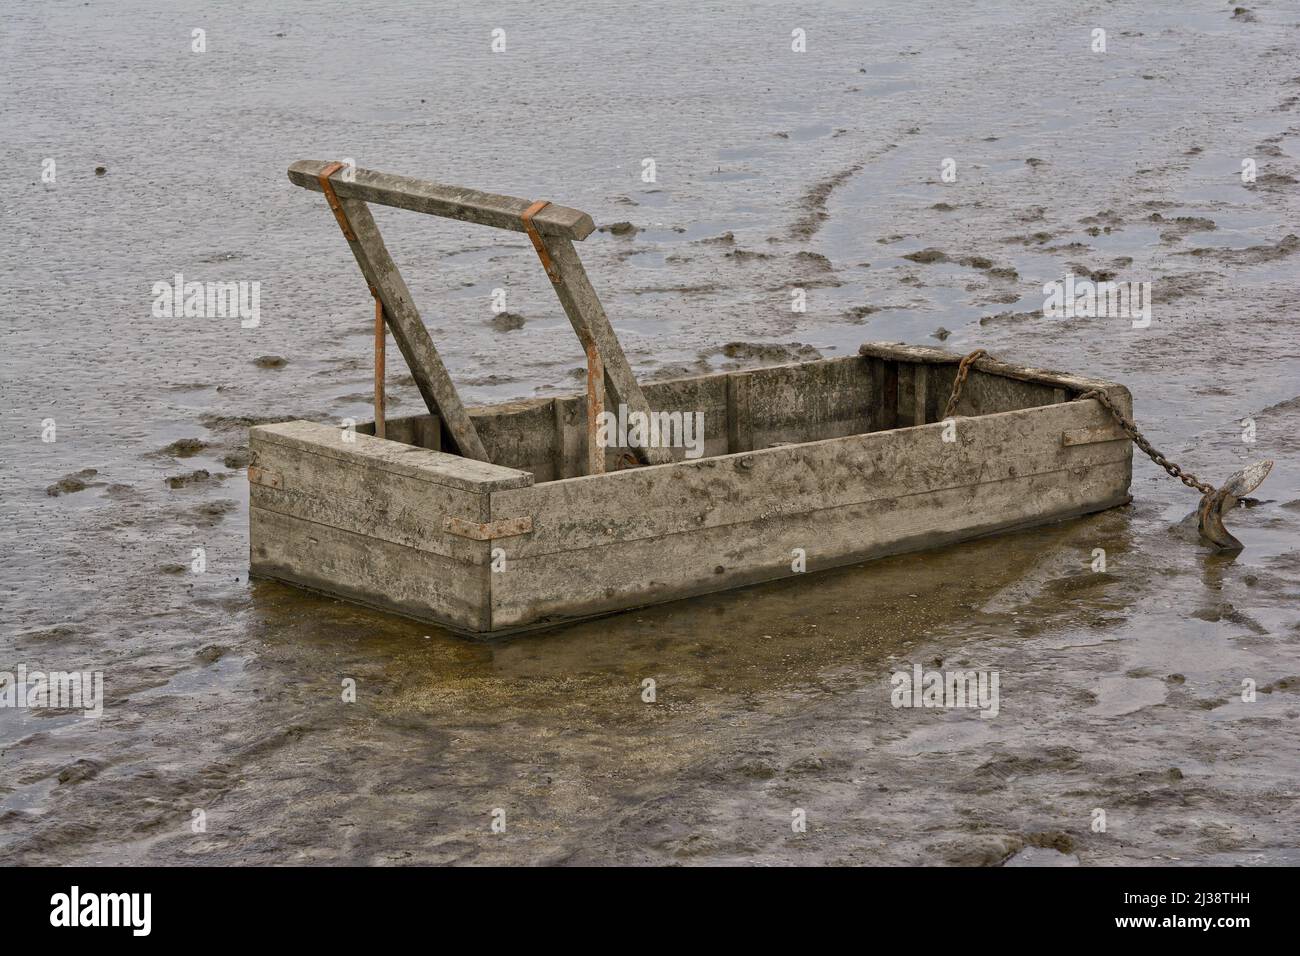 traditional mud sled called Schlickschlitten or Kreier to work while low water in Wattenmeer,North Sea,lower Saxony,Germany Stock Photo